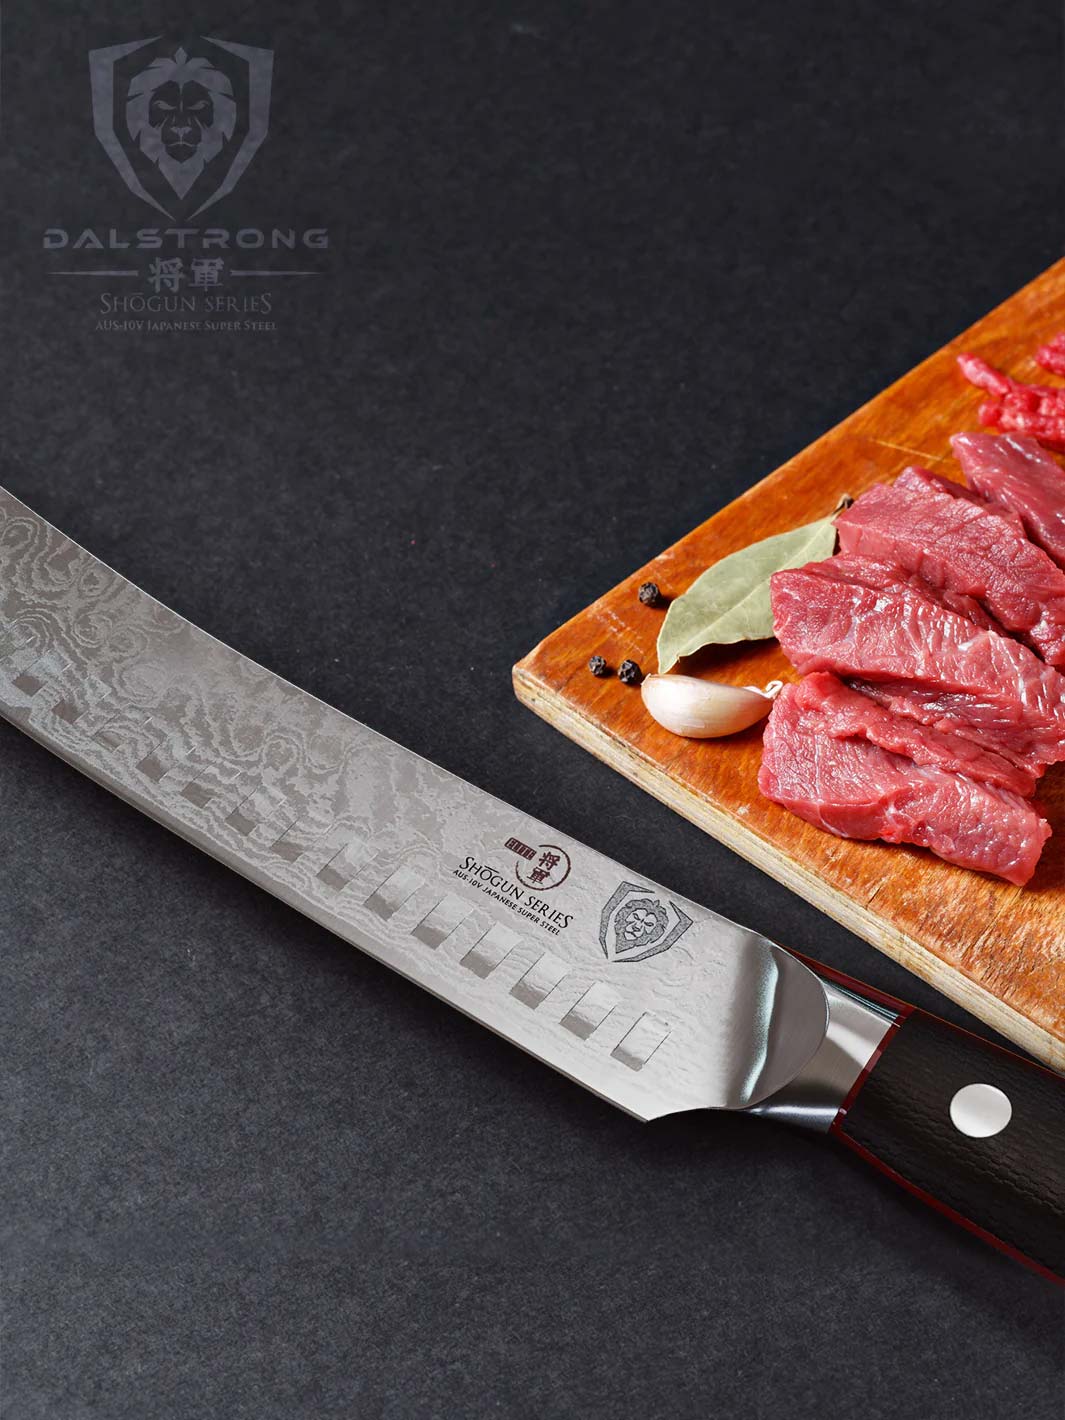 Dalstrong - Shogun Series Slicer - Japanese AUS-10V Super Steel - Vacuum Treated - Guard Included (10 inch Butcher-Breaking Cimitar Knife)